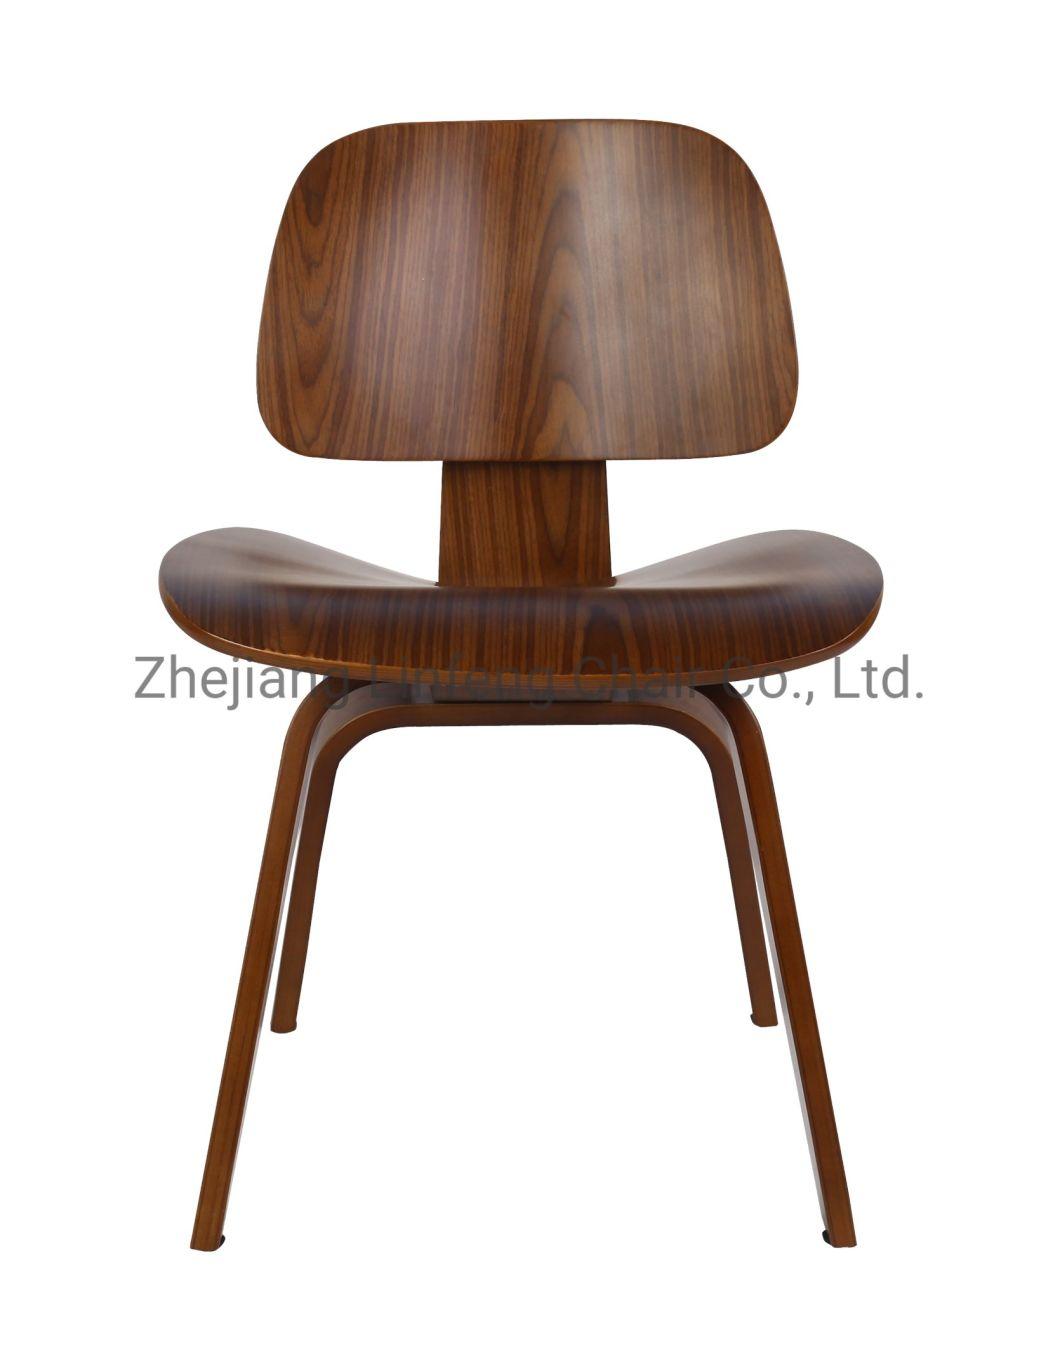 Leisure Coffee Chair Leather Cushion Restaurant Wood Side Dining Chair